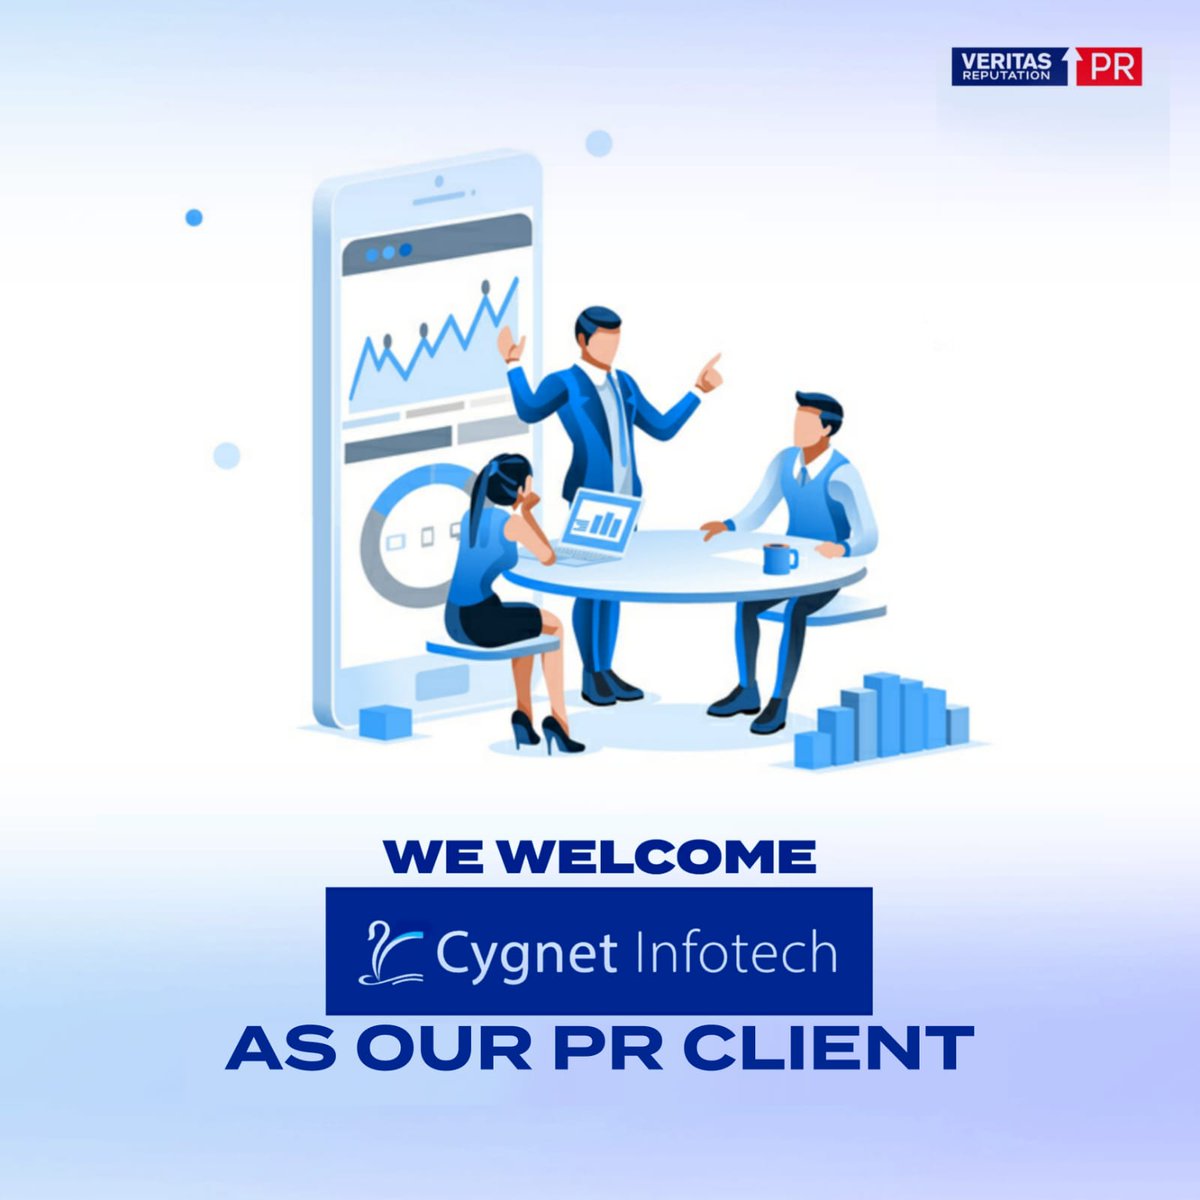 We are happy to welcome onboard @CygnetInfotech as our PR client.
#WelcomeOnboard #PublicRelations #ClientDairies #CygnetInfotech #CygnetFintech #Fintech